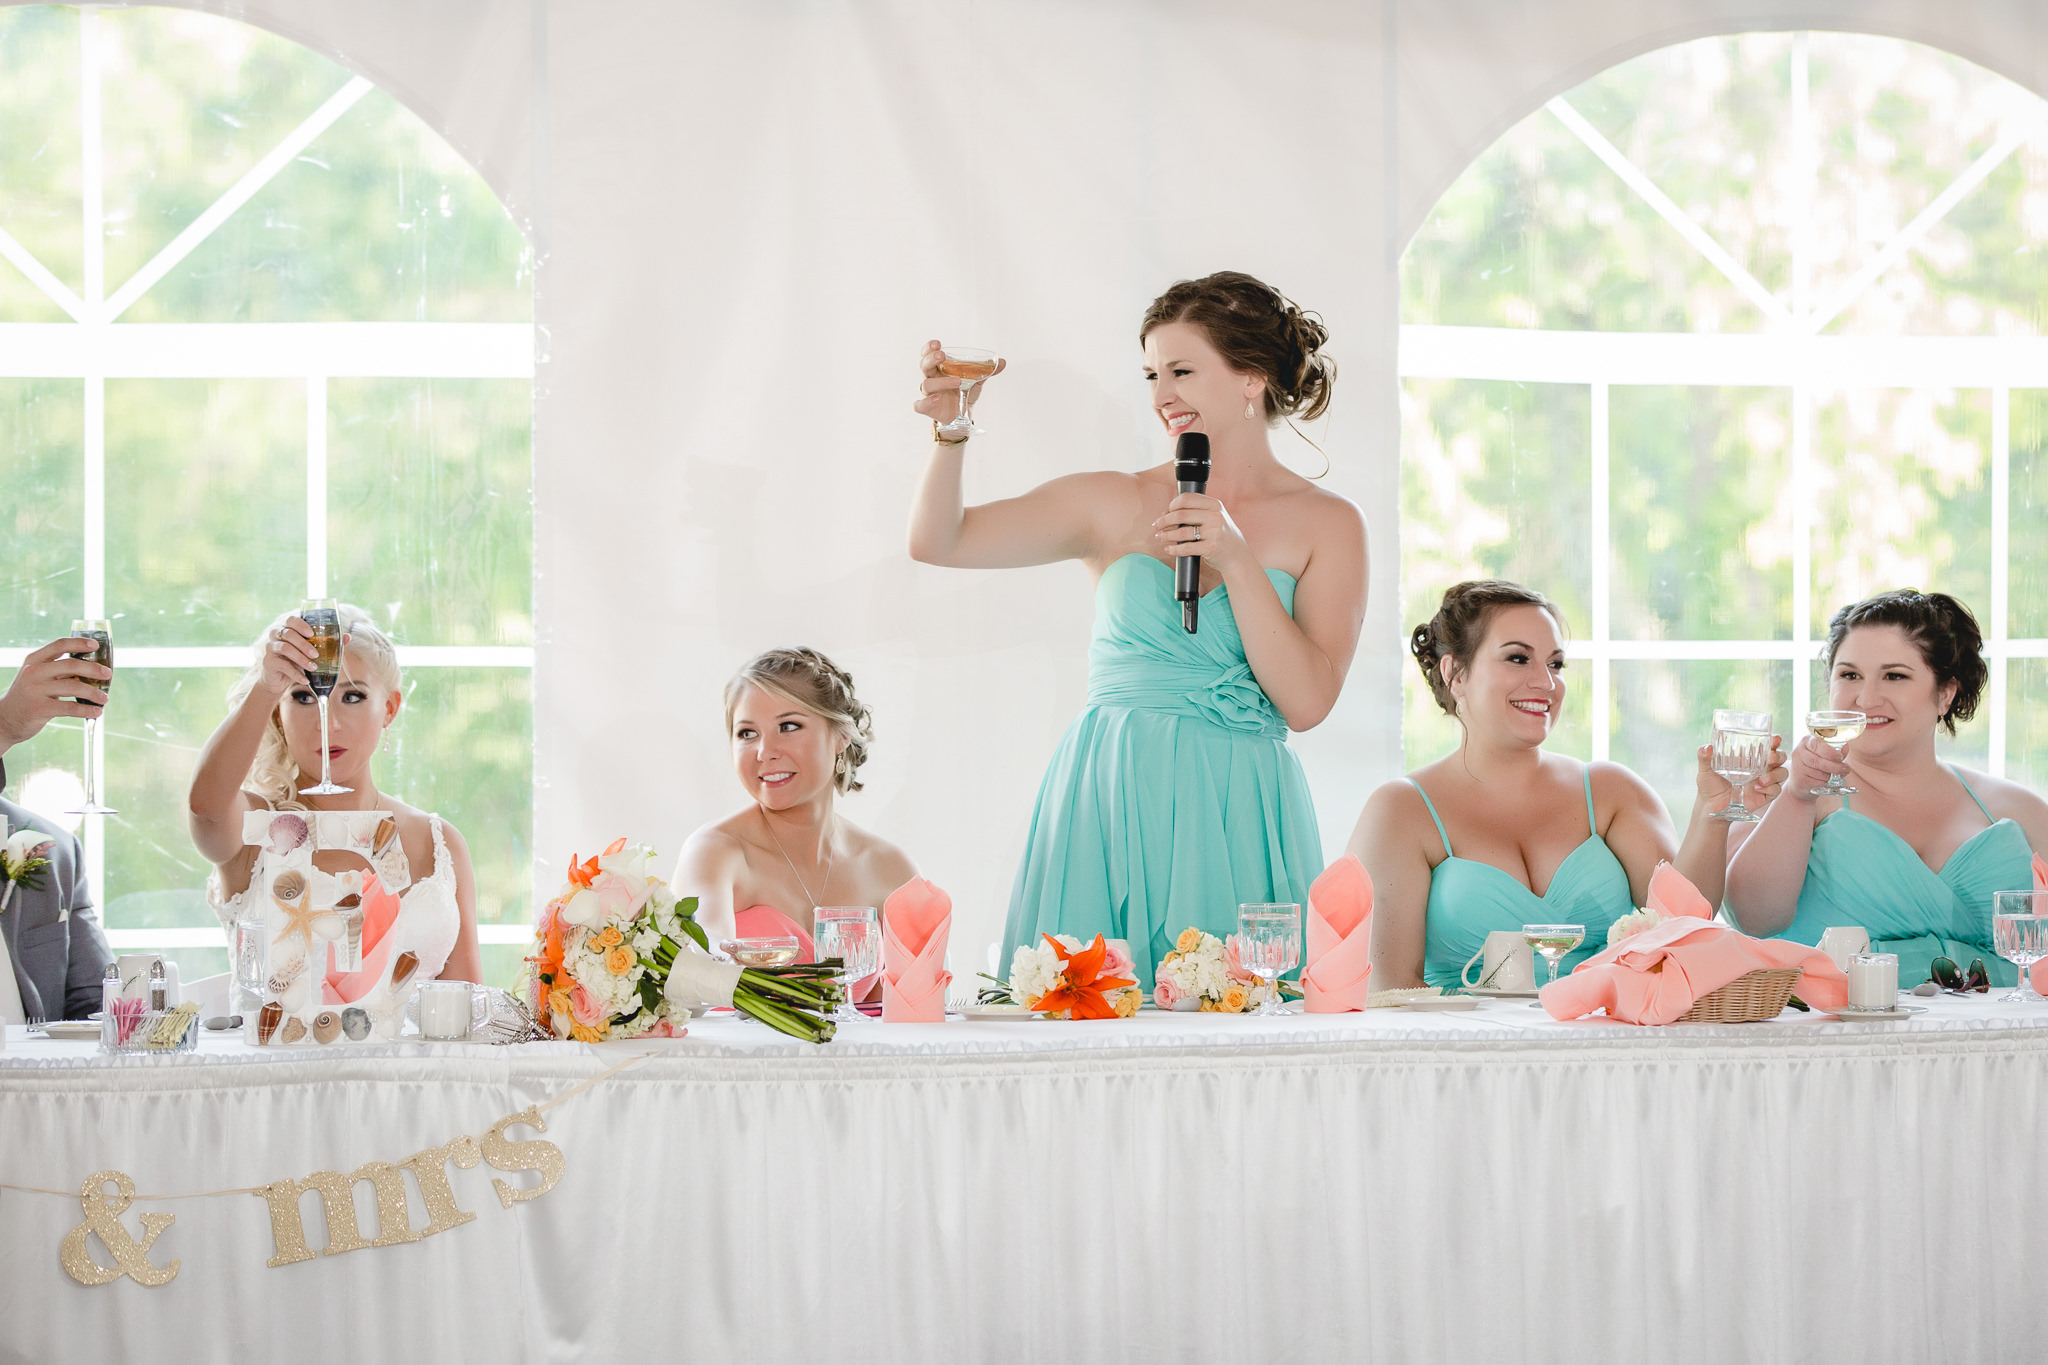 Matron of honor toasts the bride and groom